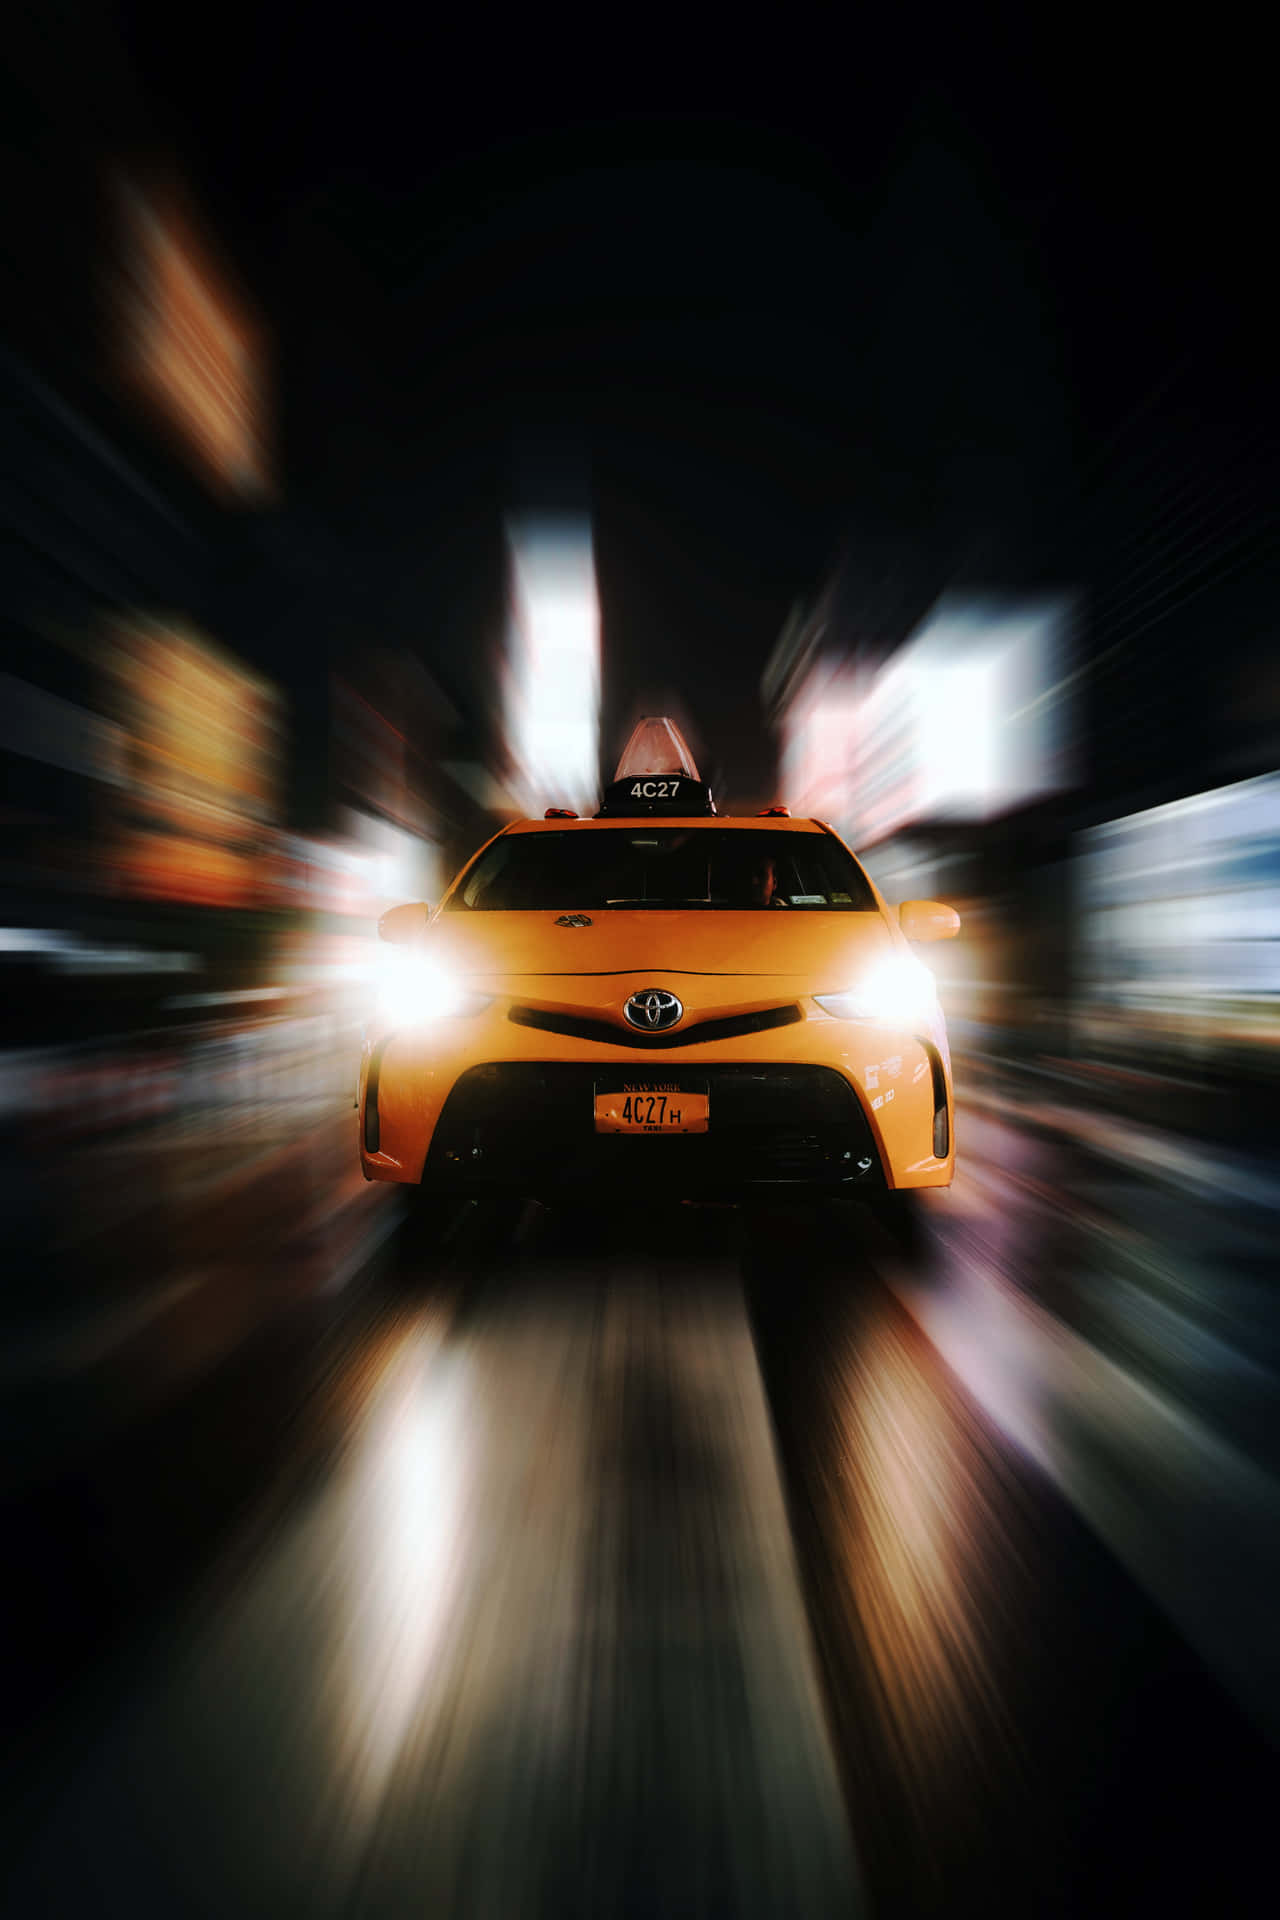 Yellow Cab in the City Streets Wallpaper